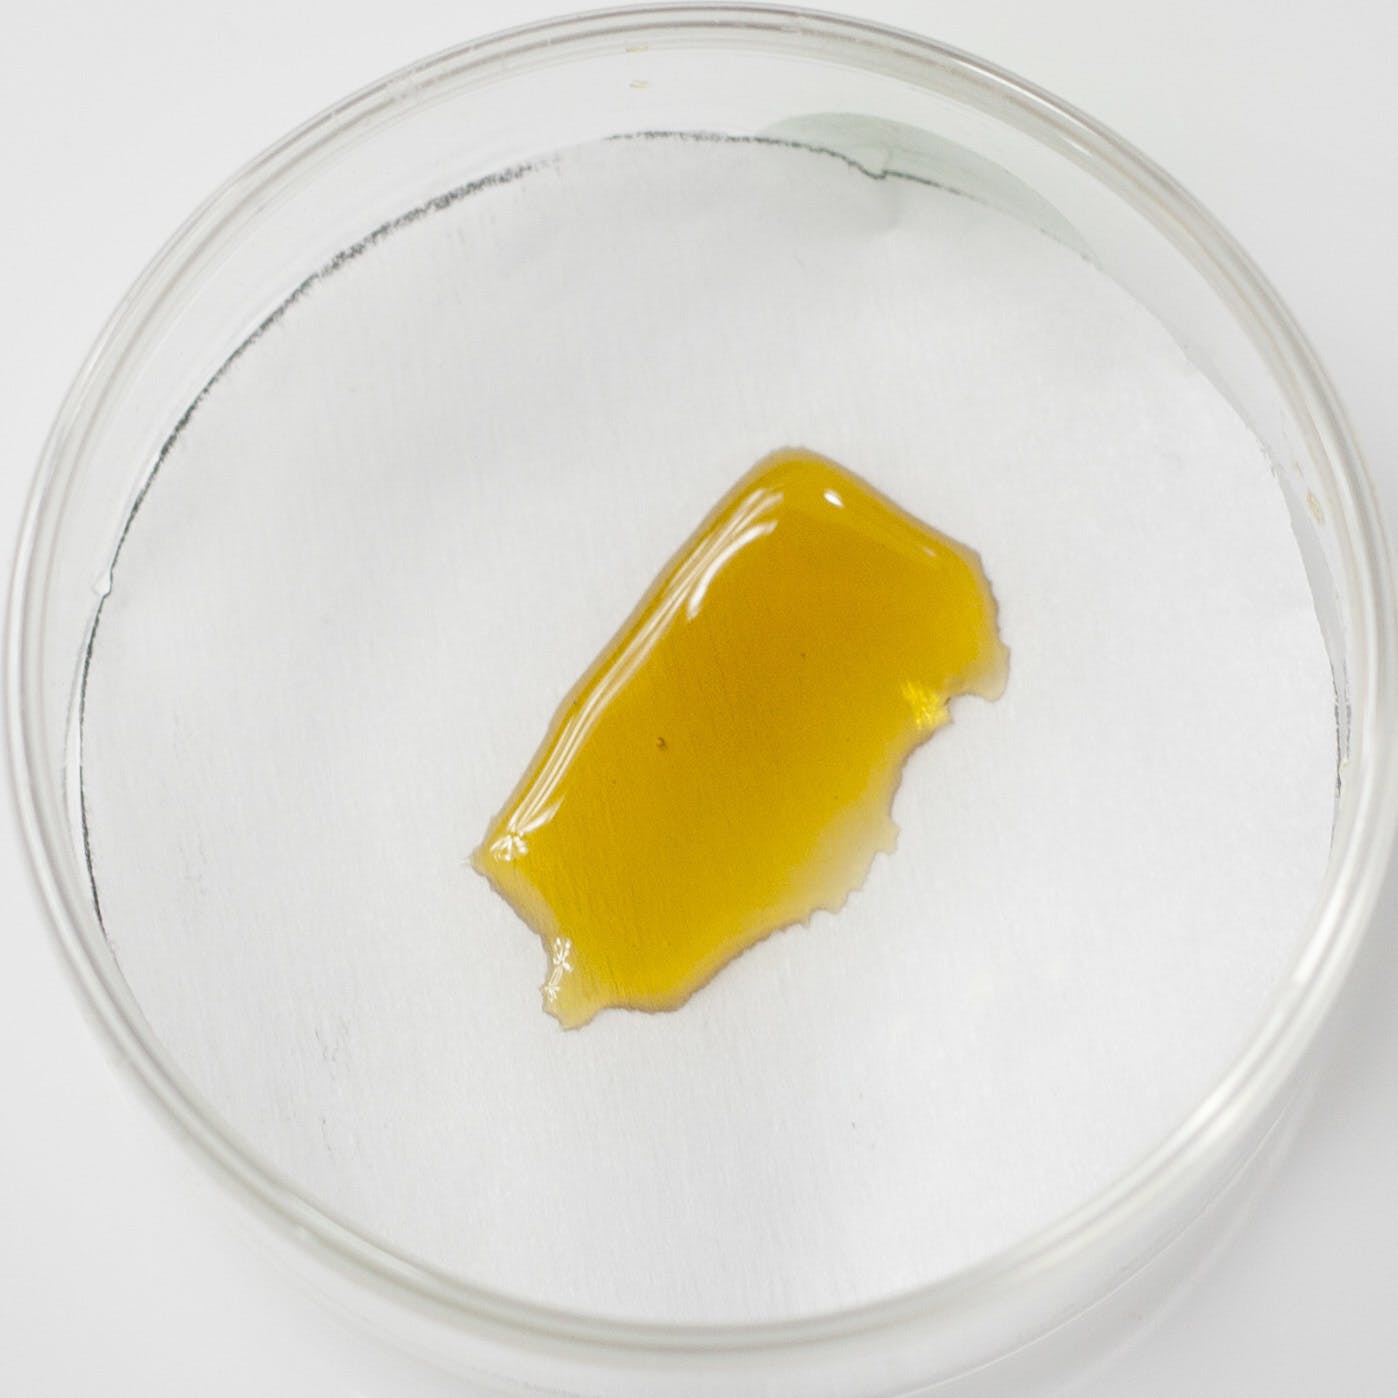 wax-strawberry-gobstopper-artifact-extracts-72-64-25-thc